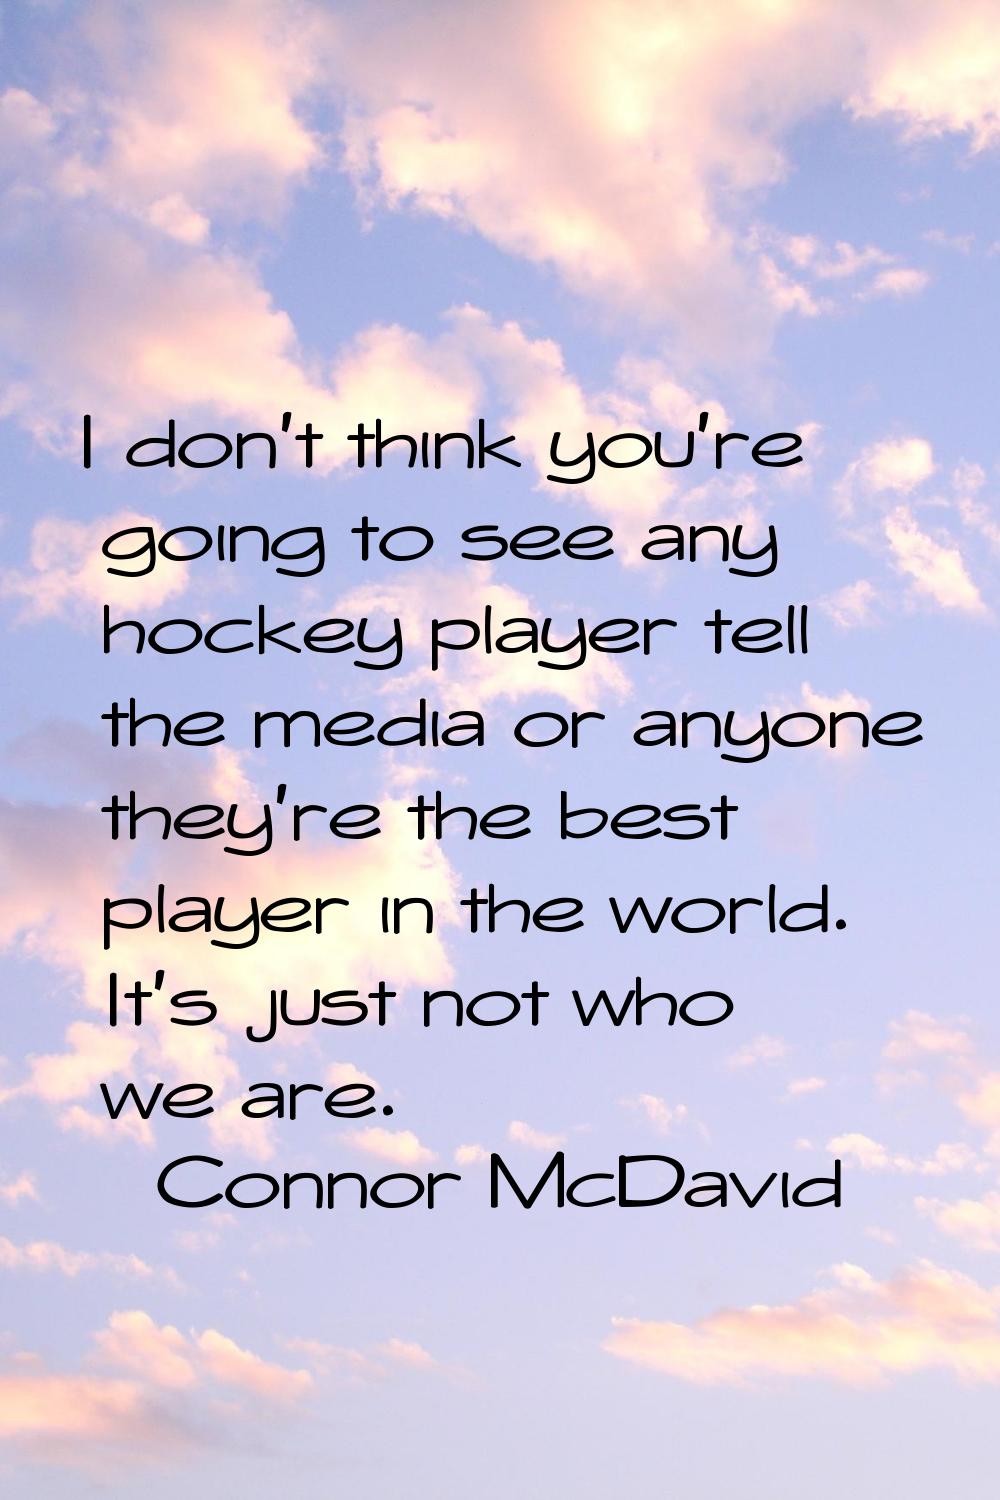 I don't think you're going to see any hockey player tell the media or anyone they're the best playe